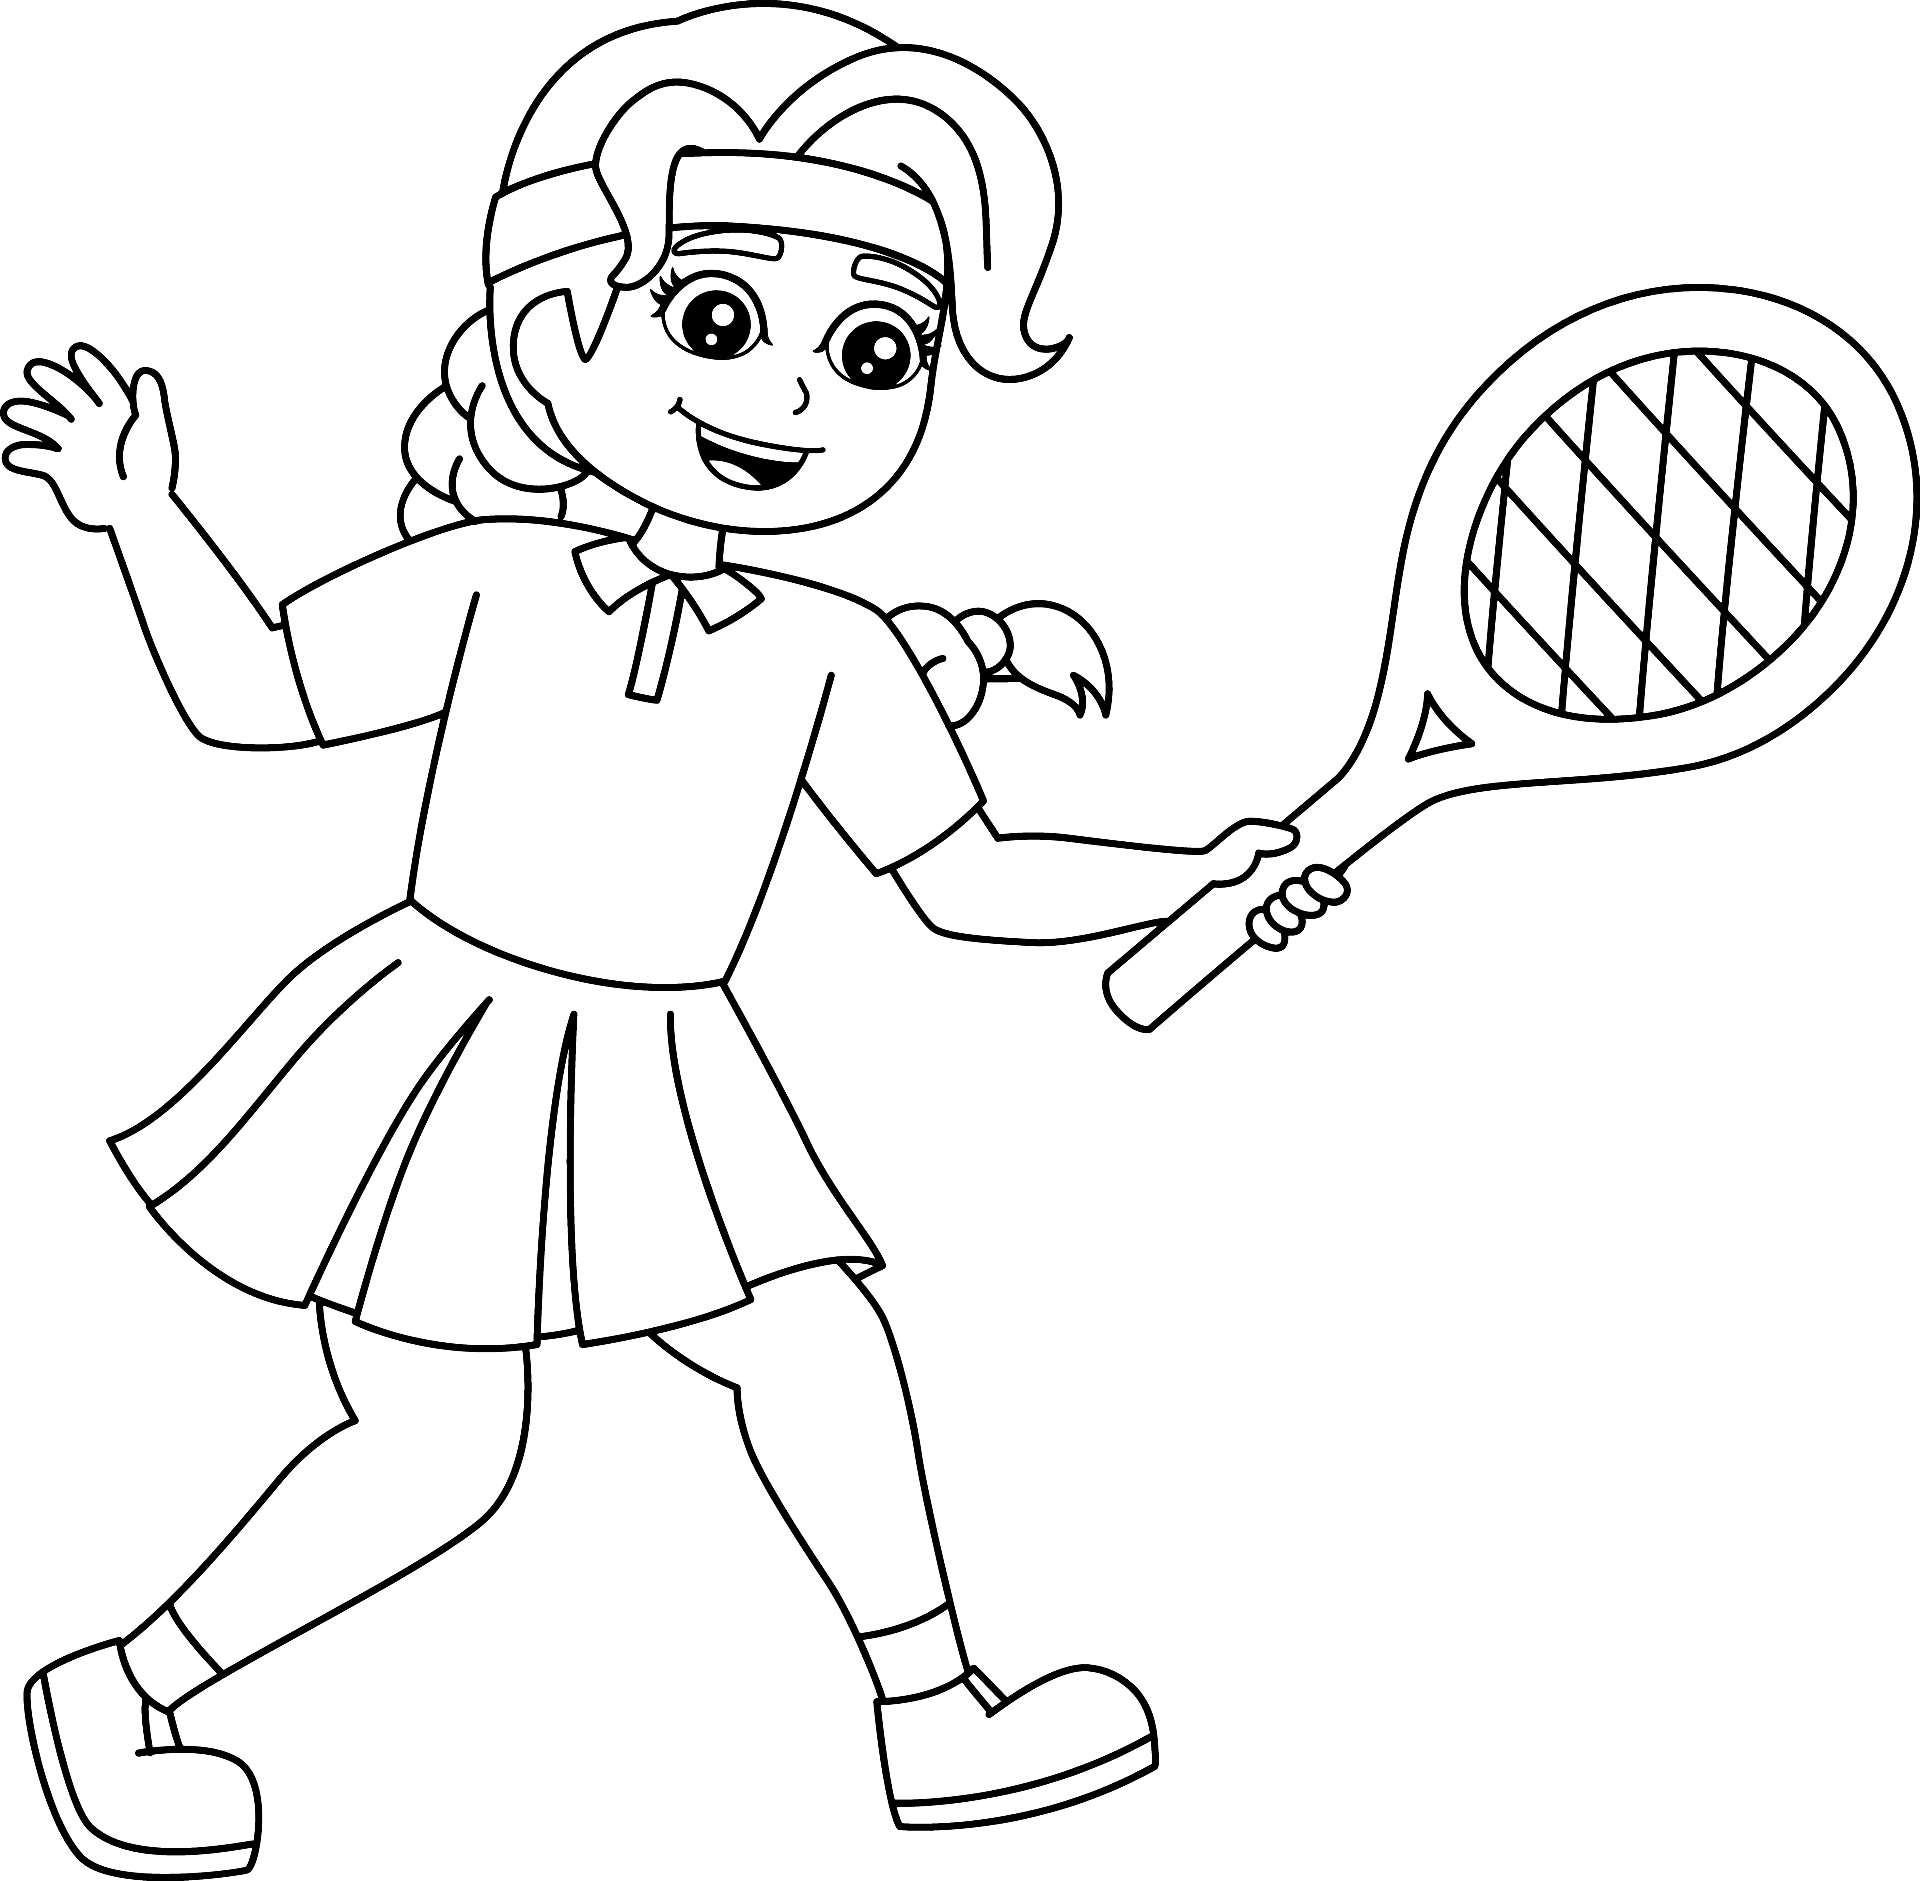 Girl Playing Tennis Coloring Page